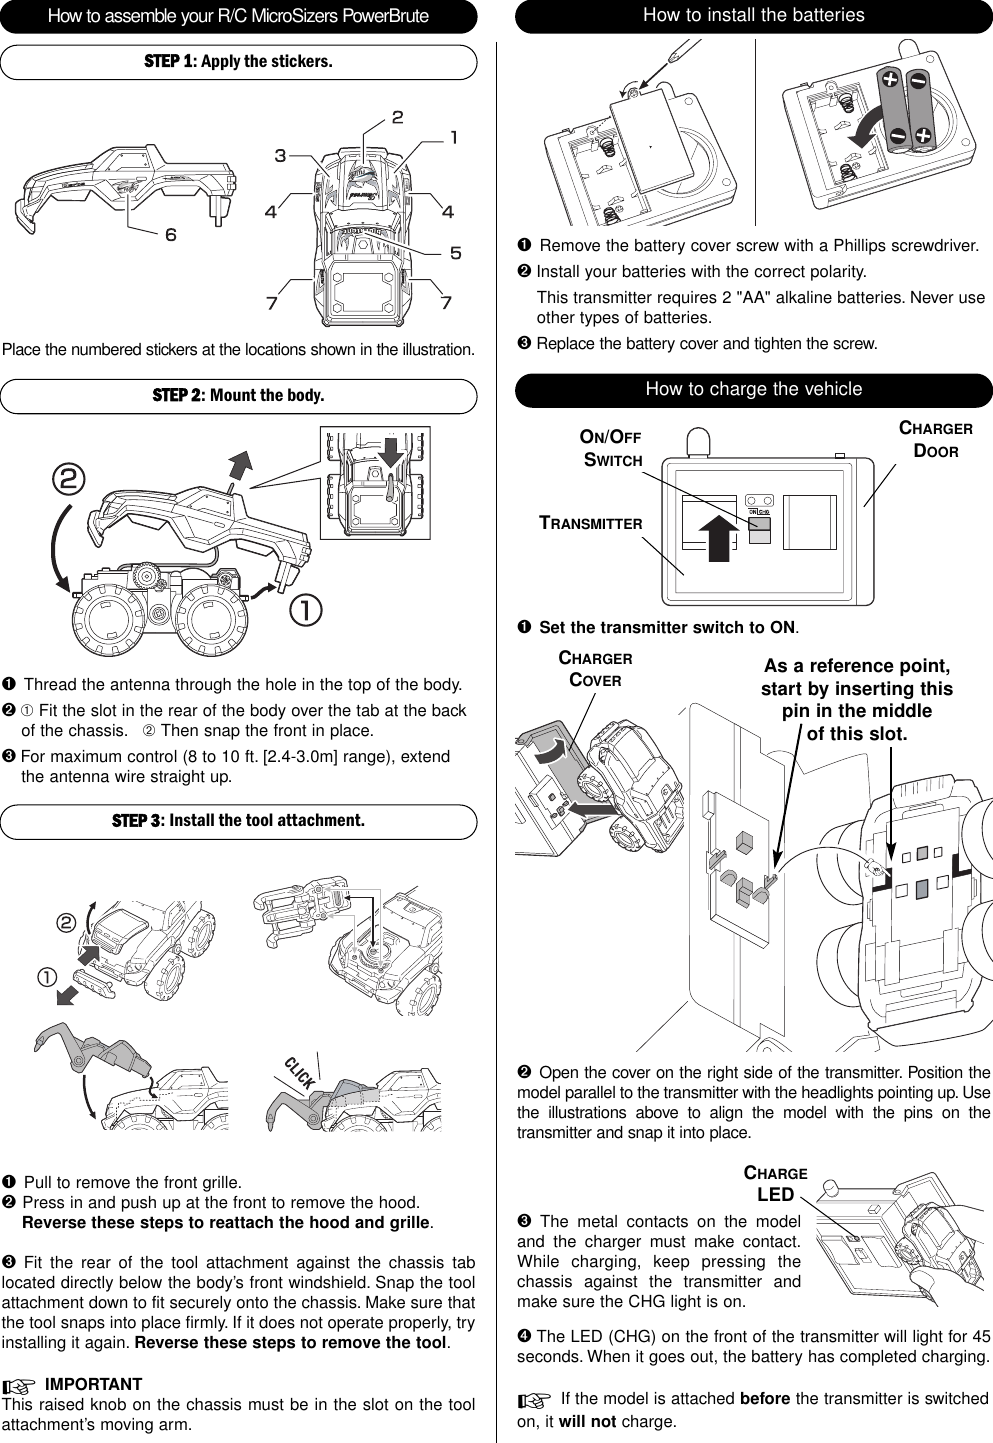 How to assemble your R/C MicroSizers PowerBrute How to install the batteriesSTEP 2: Mount the body.STEP 3: Install the tool attachment.Place the numbered stickers at the locations shown in the illustration.➊Pull to remove the front grille.➋Press in and push up at the front to remove the hood.Reverse these steps to reattach the hood and grille.➌  Fit the rear of the tool attachment against the chassis tablocated directly below the body’s front windshield. Snap the toolattachment down to fit securely onto the chassis. Make sure thatthe tool snaps into place firmly. If it does not operate properly, tryinstalling it again. Reverse these steps to remove the tool.☞IMPORTANTThis raised knob on the chassis must be in the slot on the toolattachment’s moving arm.➋Open the cover on the right side of the transmitter. Position themodel parallel to the transmitter with the headlights pointing up. Usethe illustrations above to align the model with the pins on thetransmitter and snap it into place.➊Thread the antenna through the hole in the top of the body.➋ ➀ Fit the slot in the rear of the body over the tab at the backof the chassis. ➁ Then snap the front in place.➌ For maximum control (8 to 10 ft. [2.4-3.0m] range), extendthe antenna wire straight up.➊Remove the battery cover screw with a Phillips screwdriver.➋ Install your batteries with the correct polarity.This transmitter requires 2 &quot;AA&quot; alkaline batteries. Never useother types of batteries.➌ Replace the battery cover and tighten the screw.How to charge the vehicle➊Set the transmitter switch to ON.ON/OFFSWITCHTRANSMITTERCHARGERDOOR➌  The metal contacts on the modeland the charger must make contact.While charging, keep pressing thechassis against the transmitter andmake sure the CHG light is on.➍ The LED (CHG) on the front of the transmitter will light for 45seconds. When it goes out, the battery has completed charging.☞If the model is attached before the transmitter is switchedon, it will not charge.STEP 1: Apply the stickers.CHARGELEDCHARGERCOVER As a reference point,start by inserting thispin in the middleof this slot.